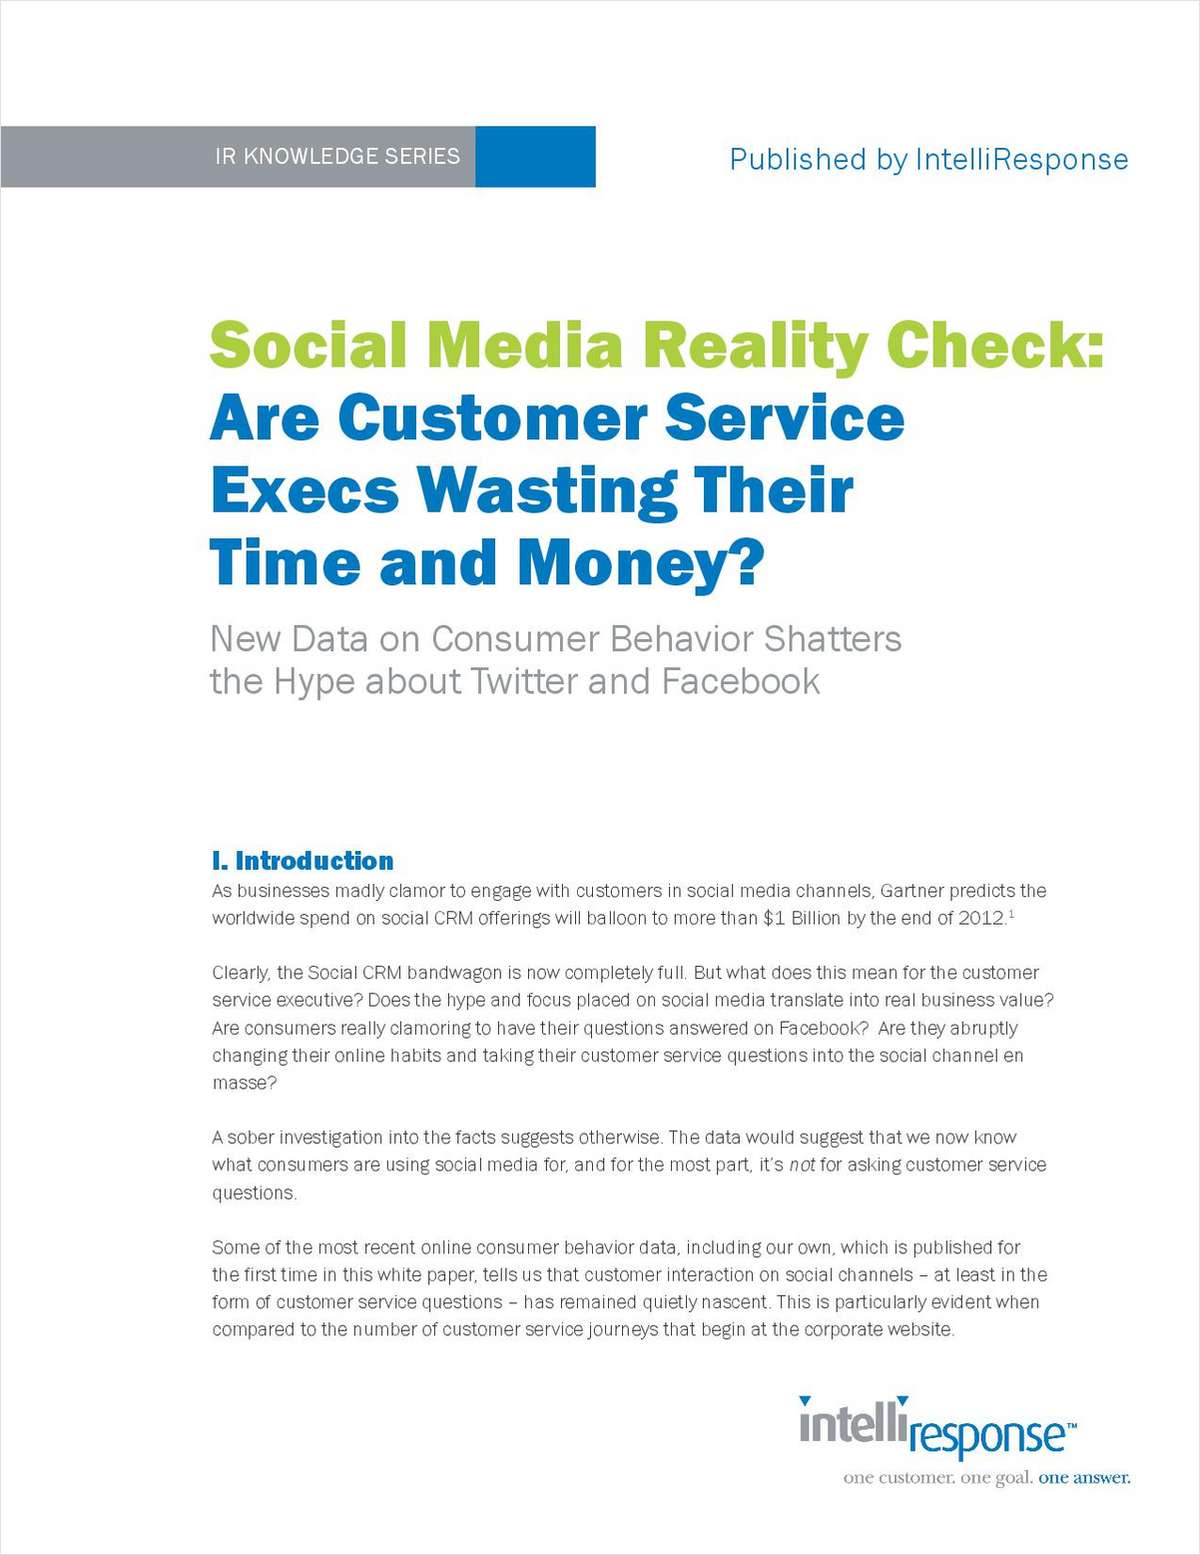 Social Media Reality Check: Are Customer Service Execs Wasting Their Time and Money?